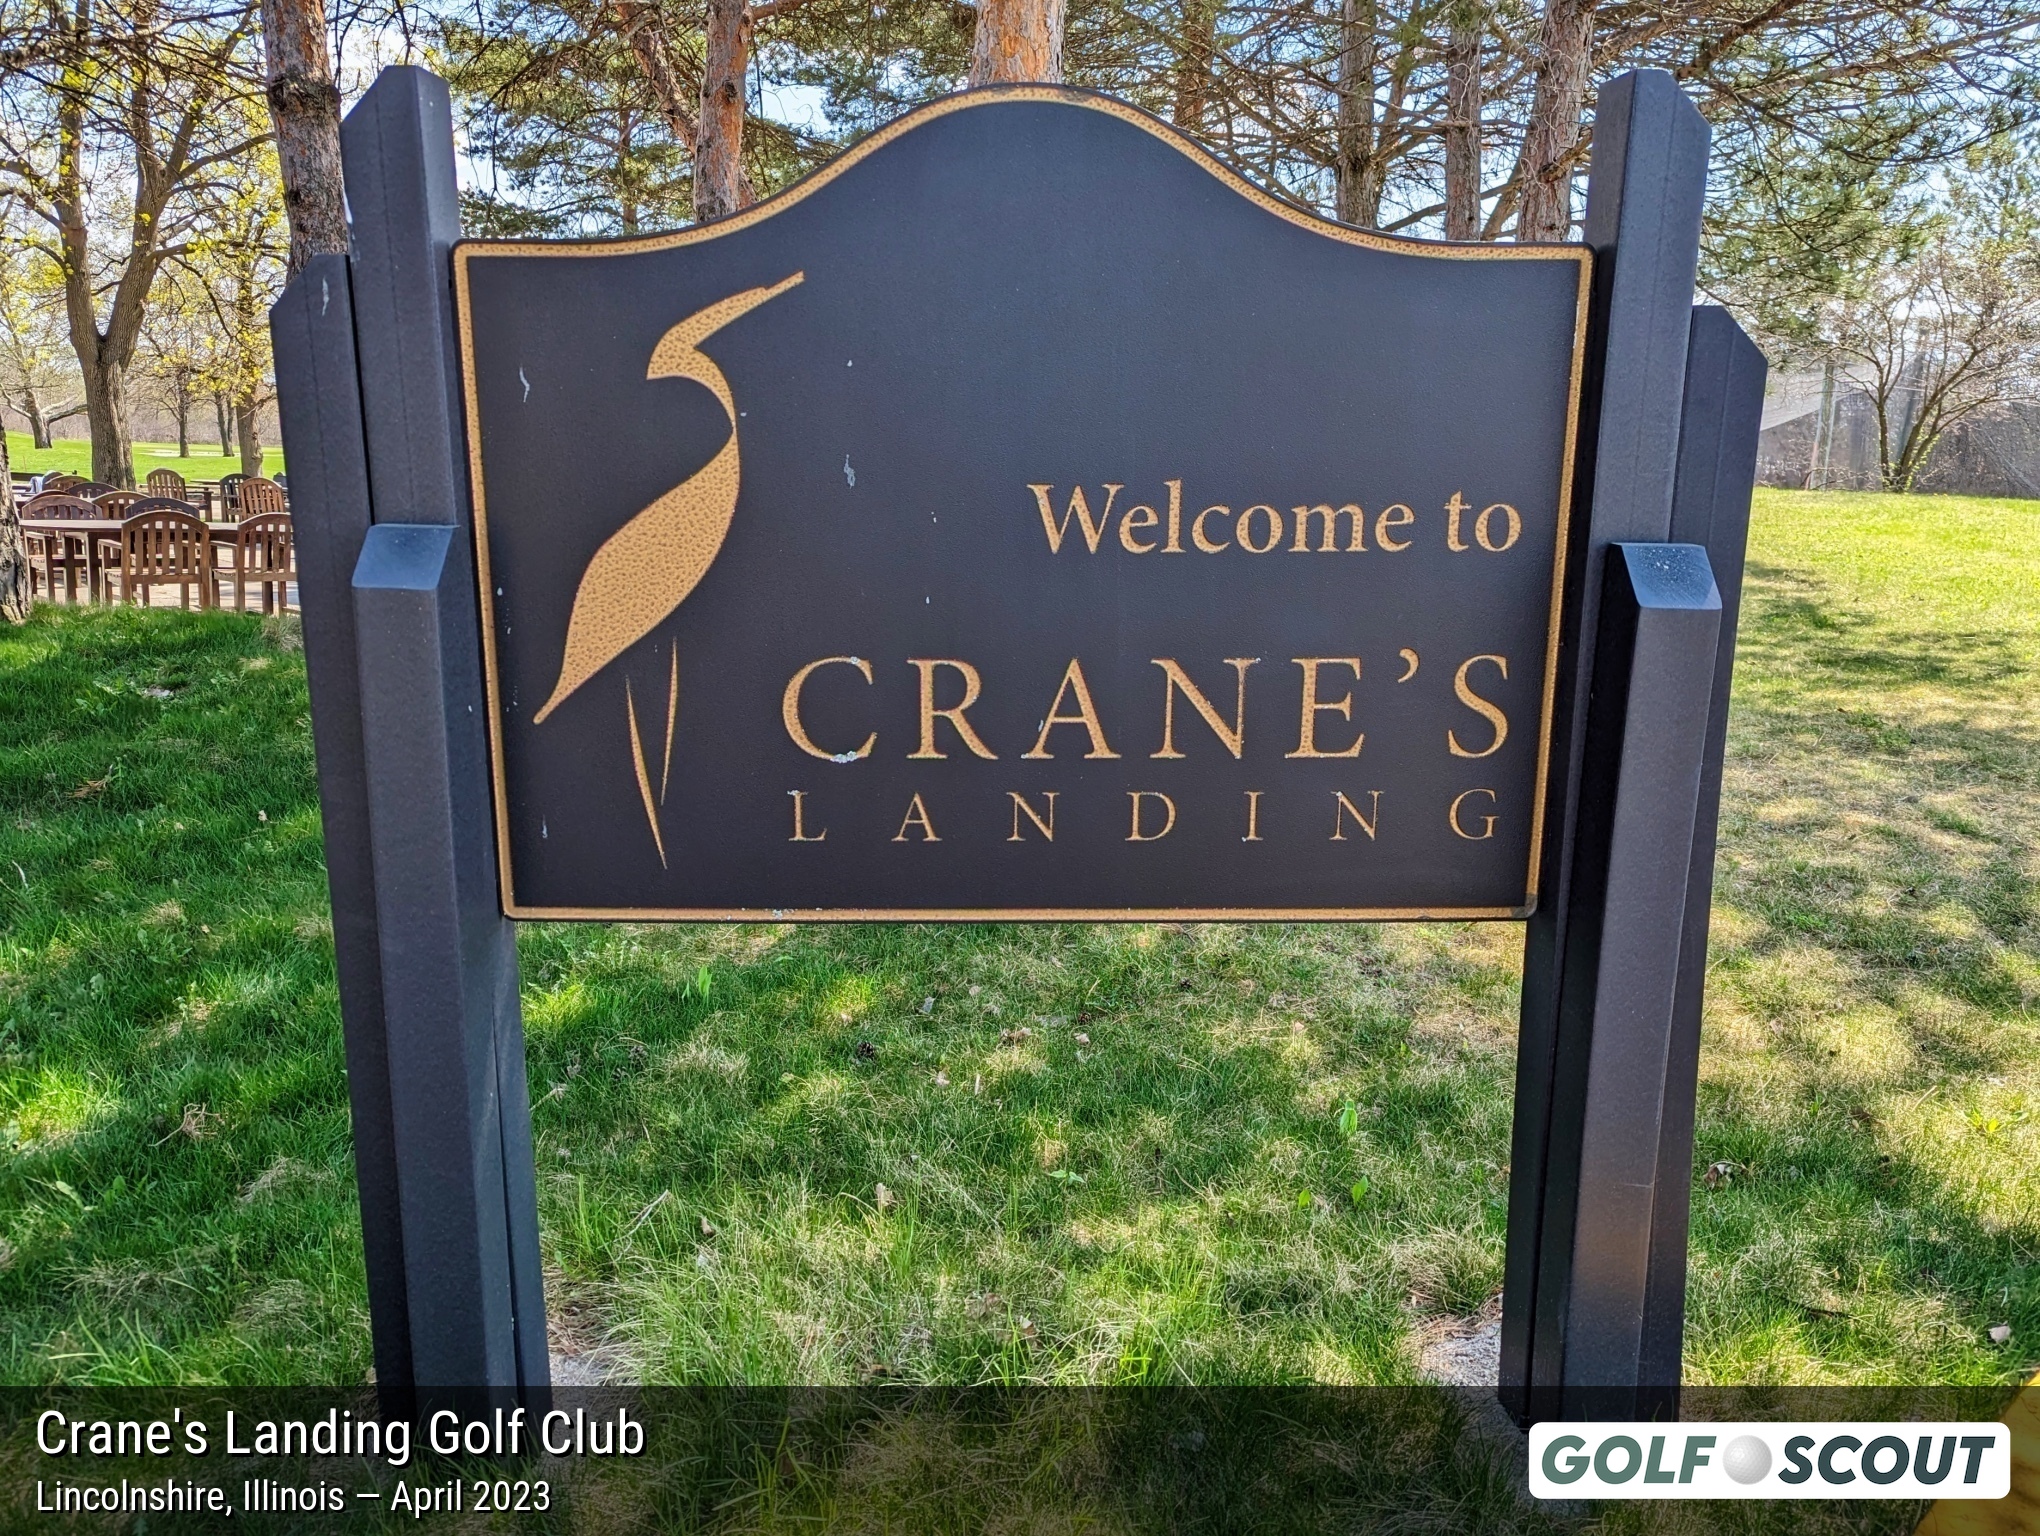 Sign at the entrance to Crane